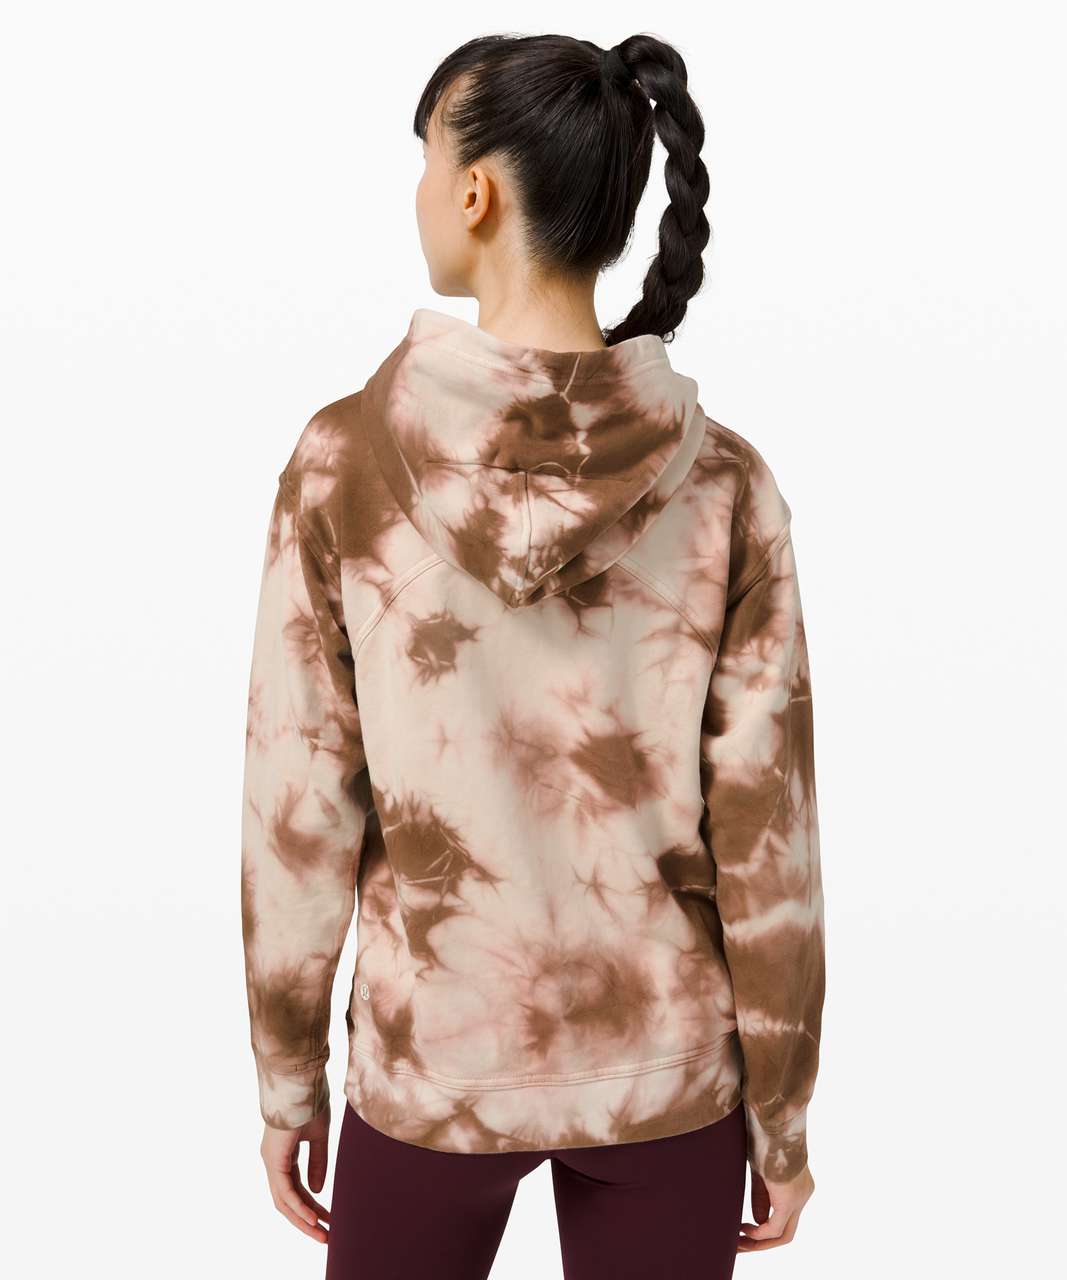 Lululemon Earth Dye Collection Review, Price, Release, and Where to Buy